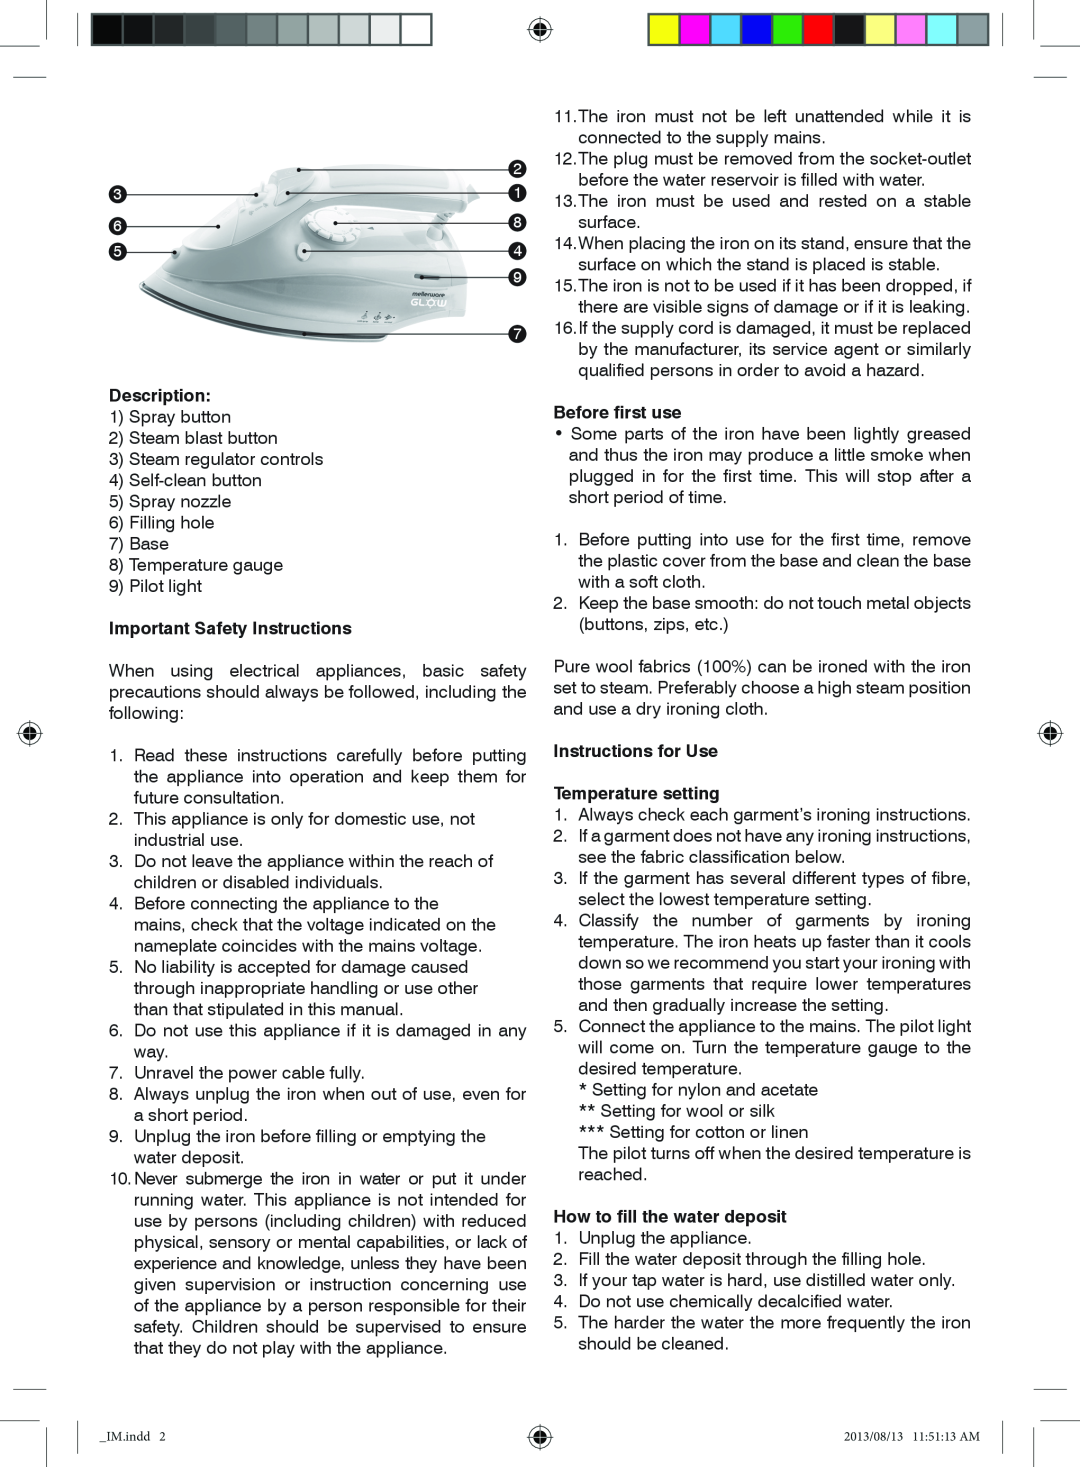 Mellerware 2200W Description, Important Safety Instructions, Before first use, Instructions for Use Temperature setting 